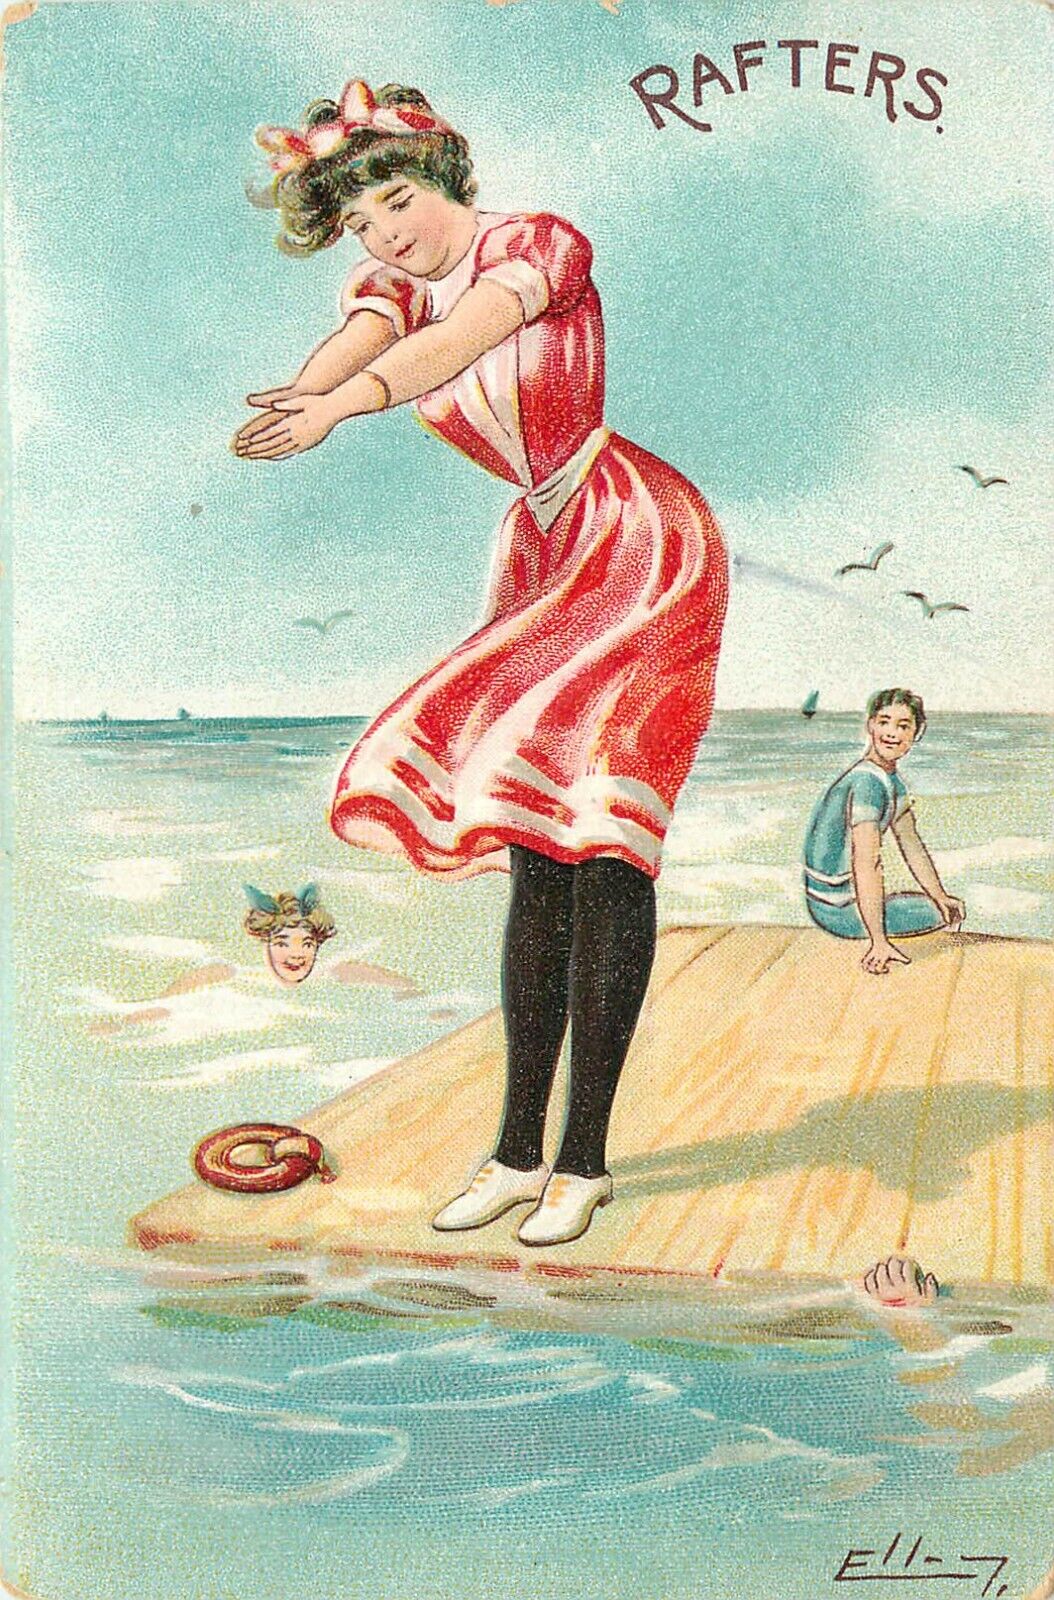 Embossed Postcard S/A Ellam Rafters Woman About To Dive in The Ocean From Dock